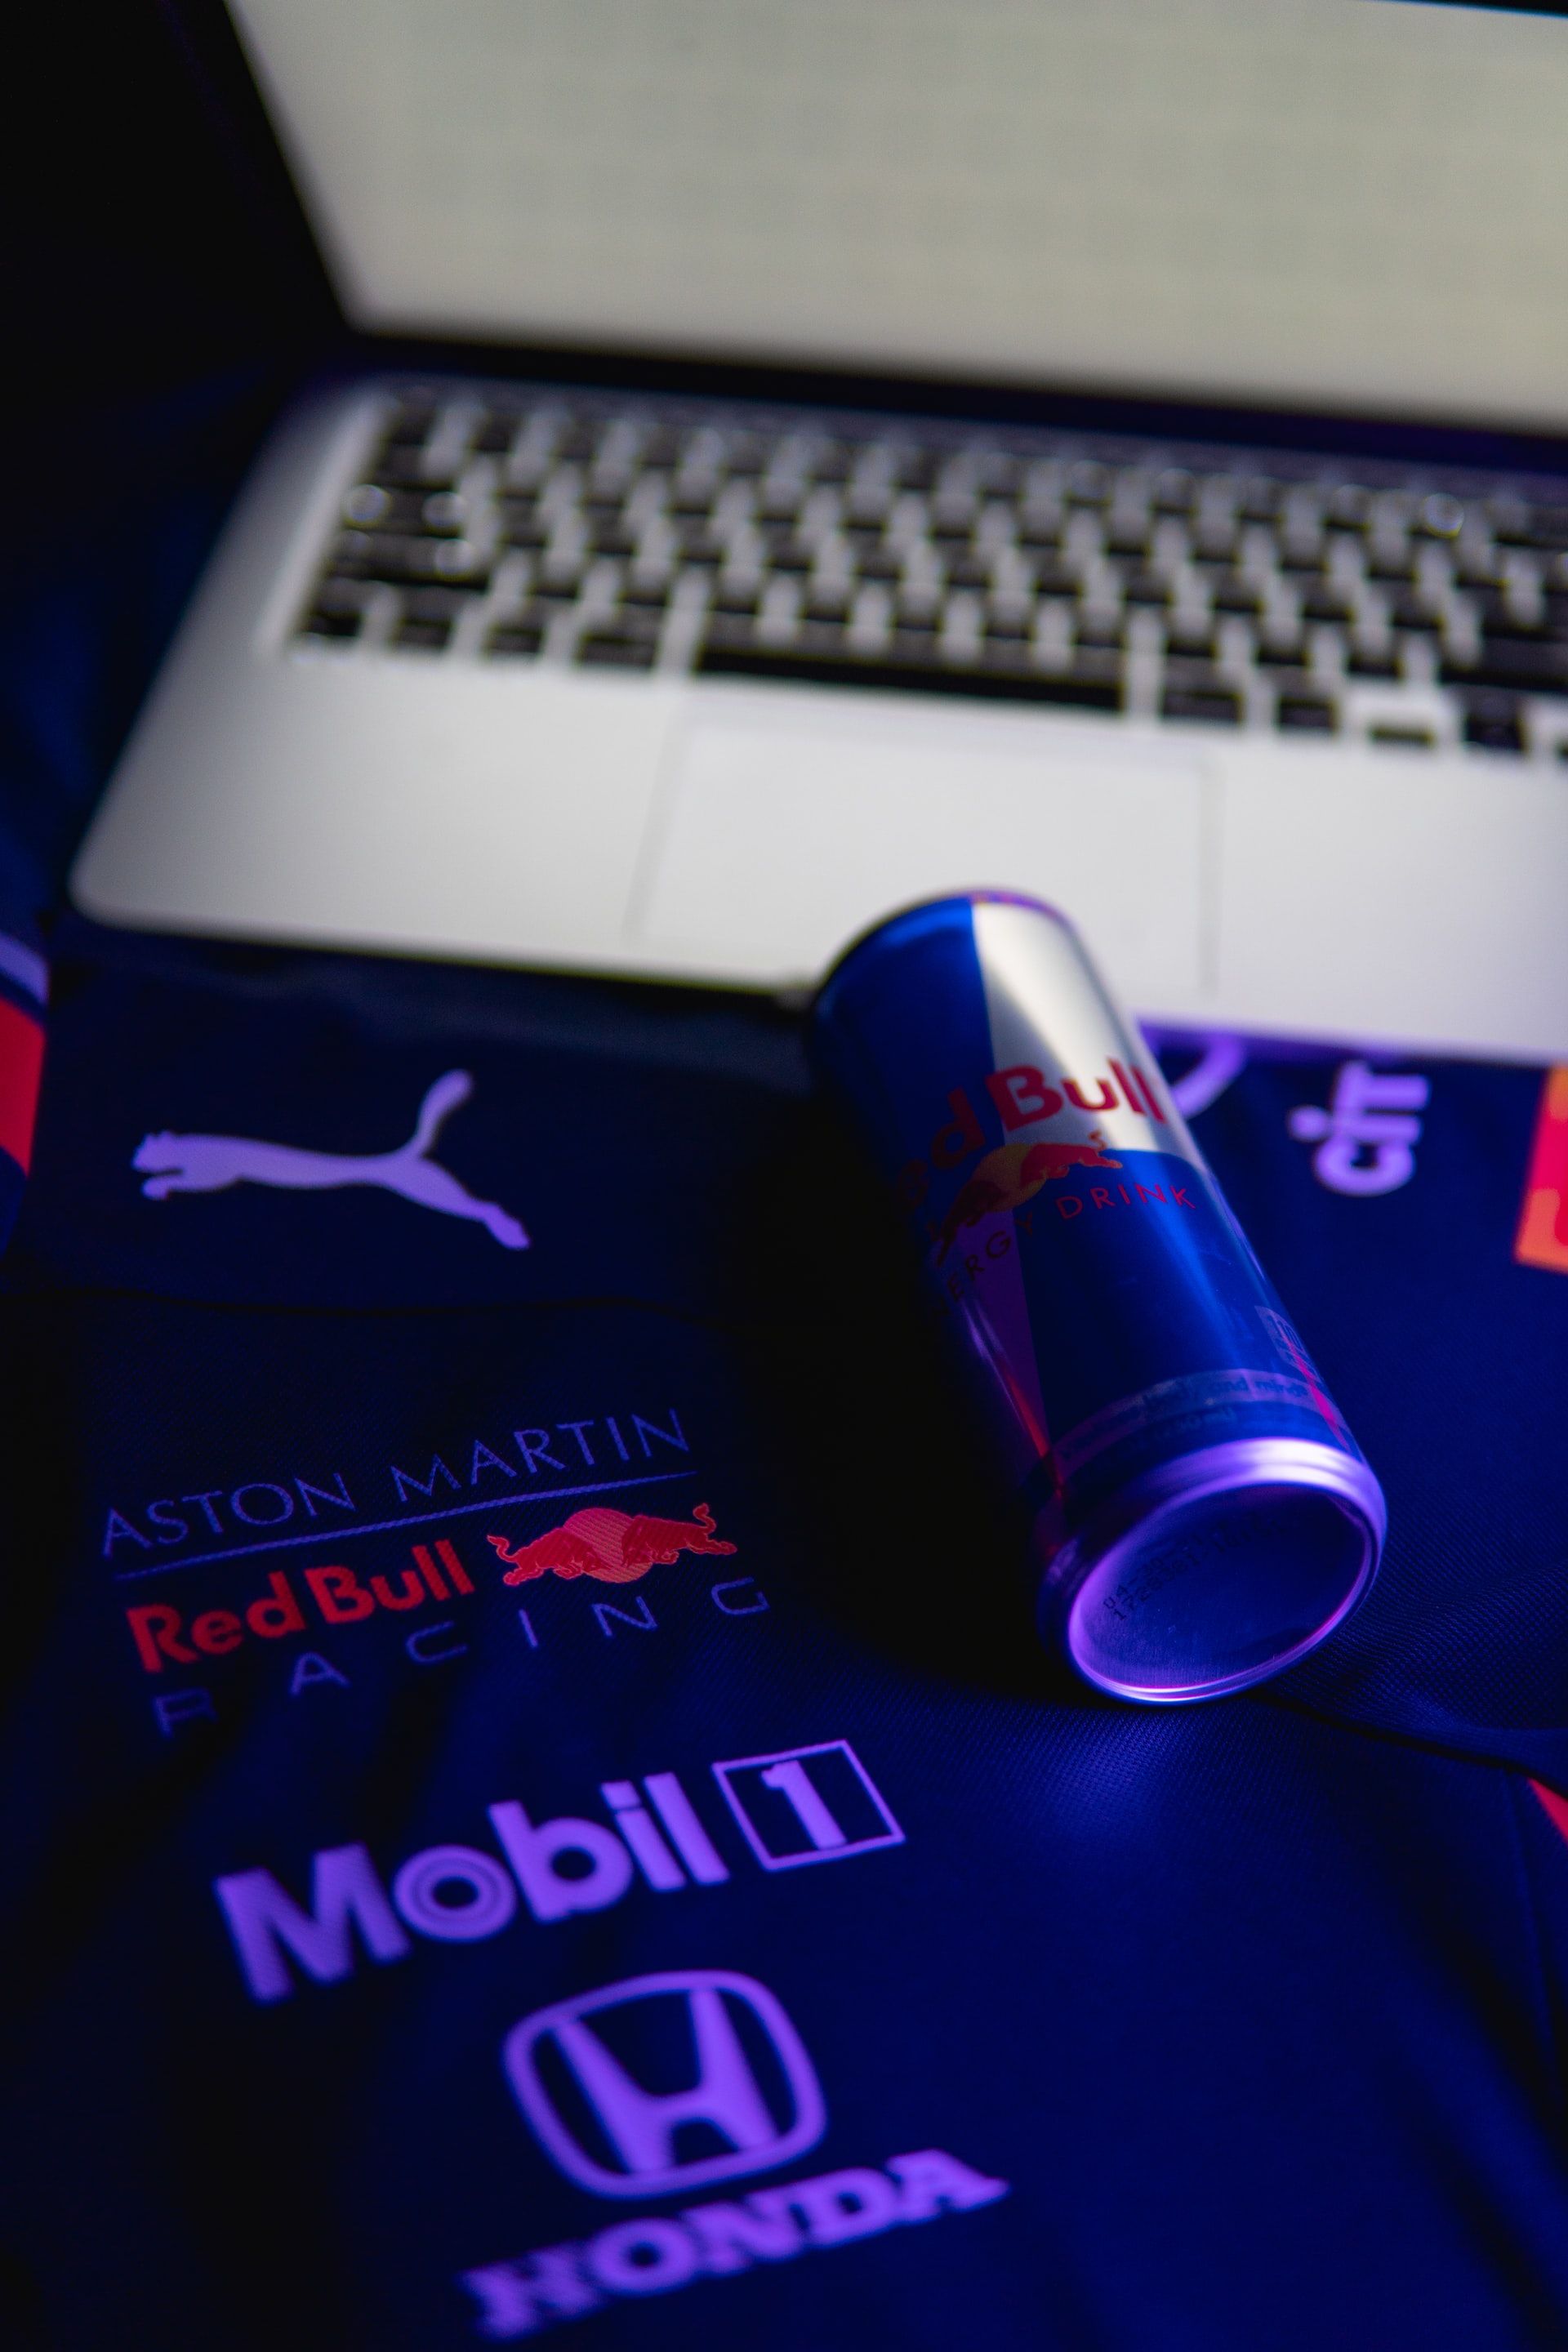 My Journey With Red Bull